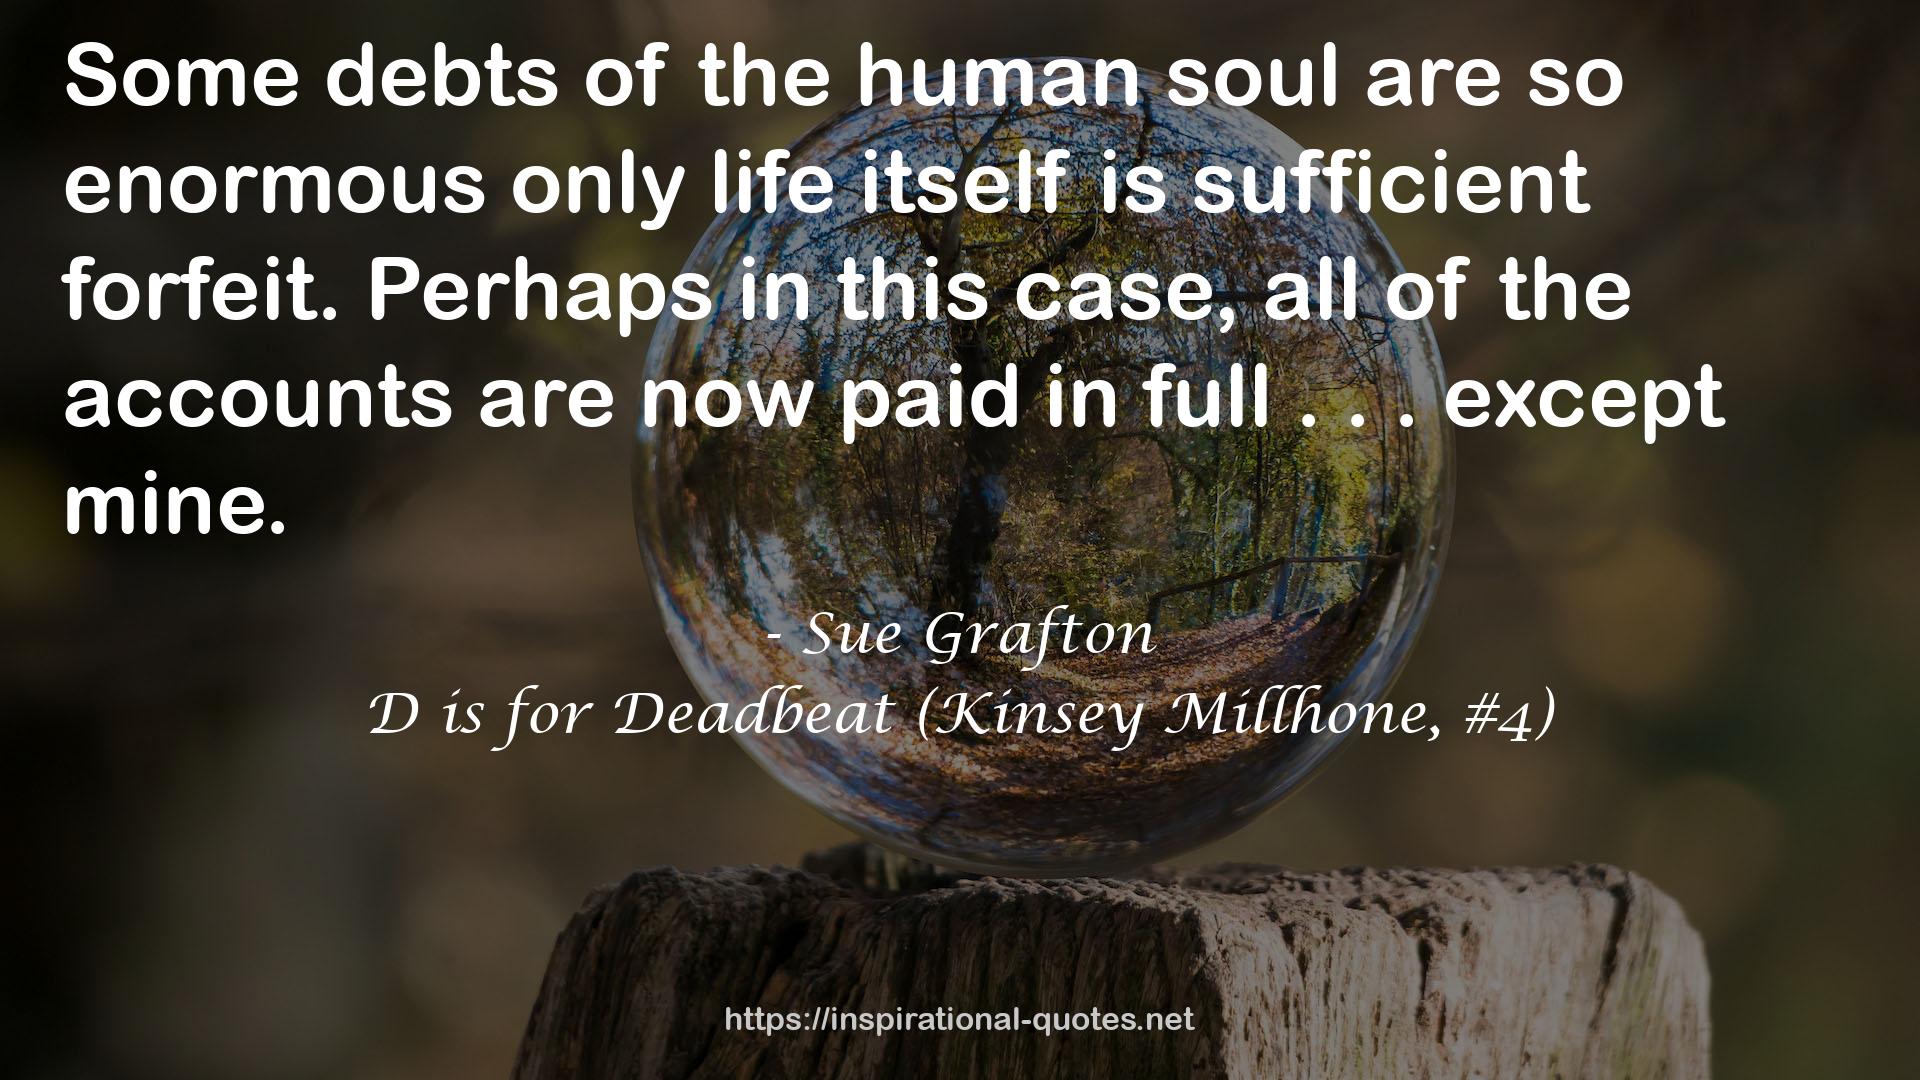 D is for Deadbeat (Kinsey Millhone, #4) QUOTES